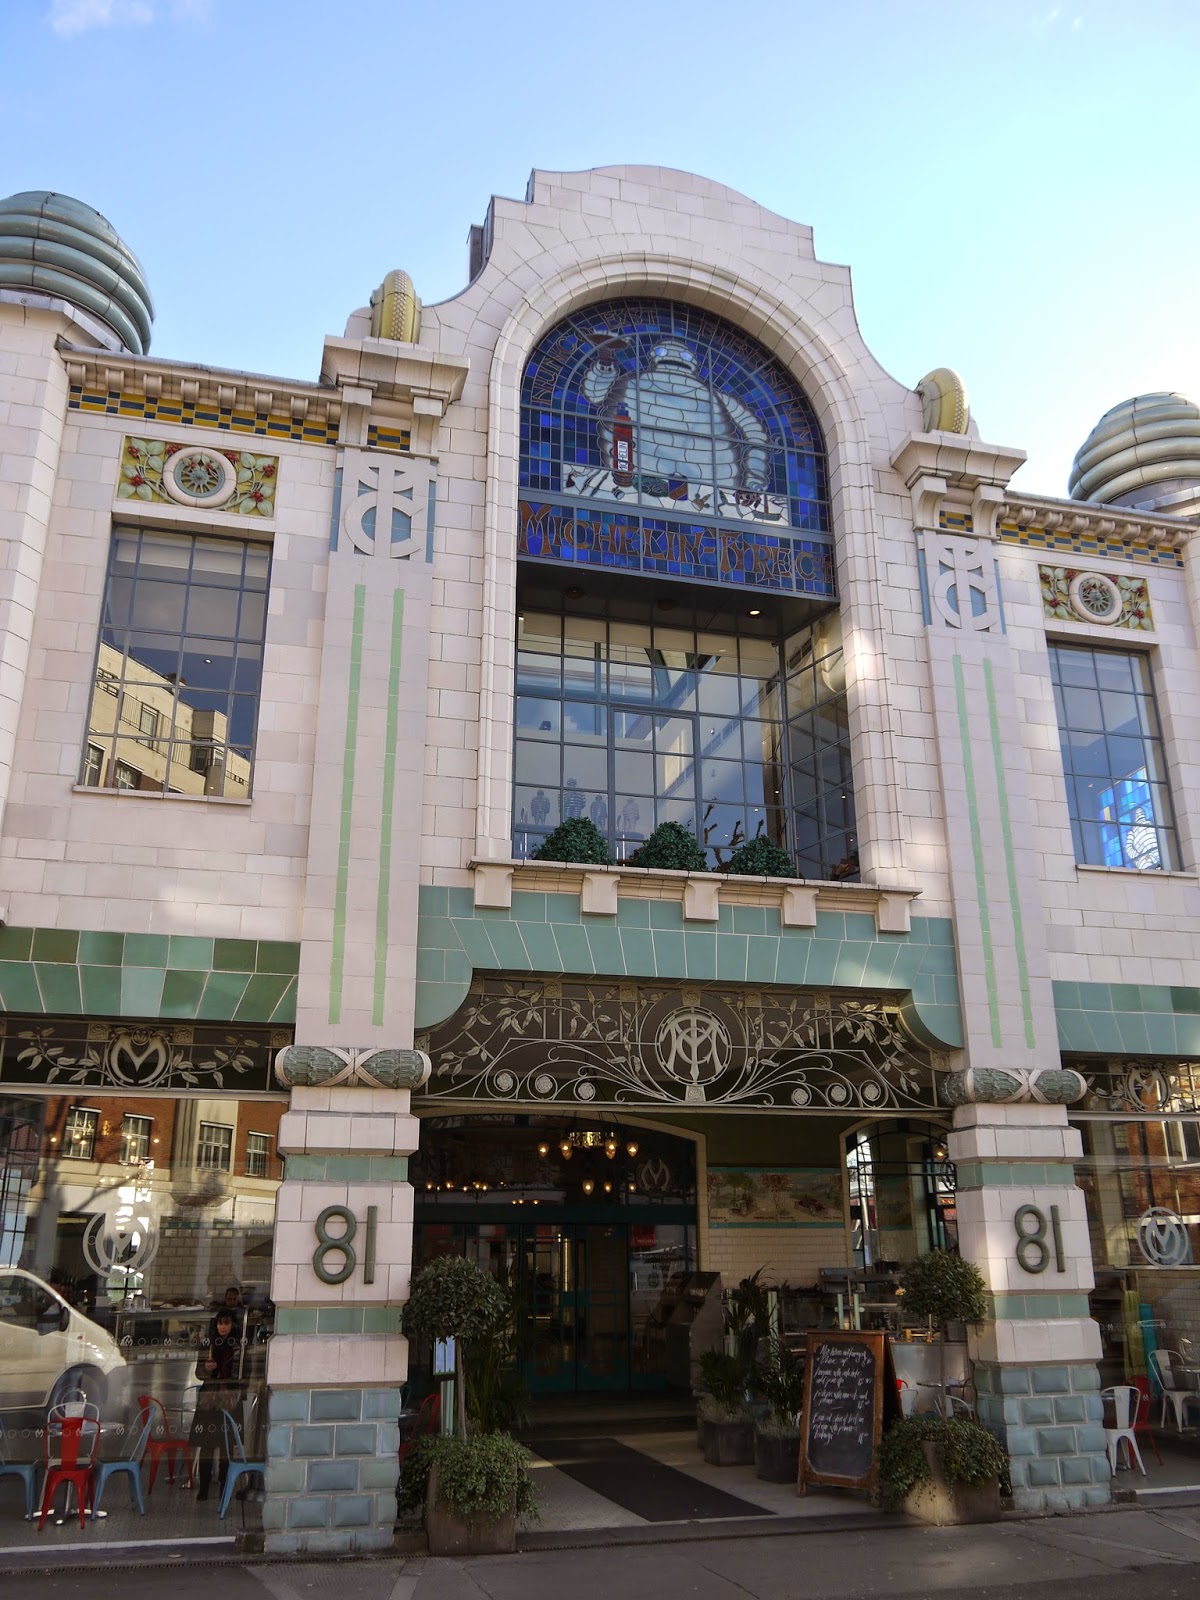 Adrian Yekkes: London's Michelin House - nouveau, deco or neither?